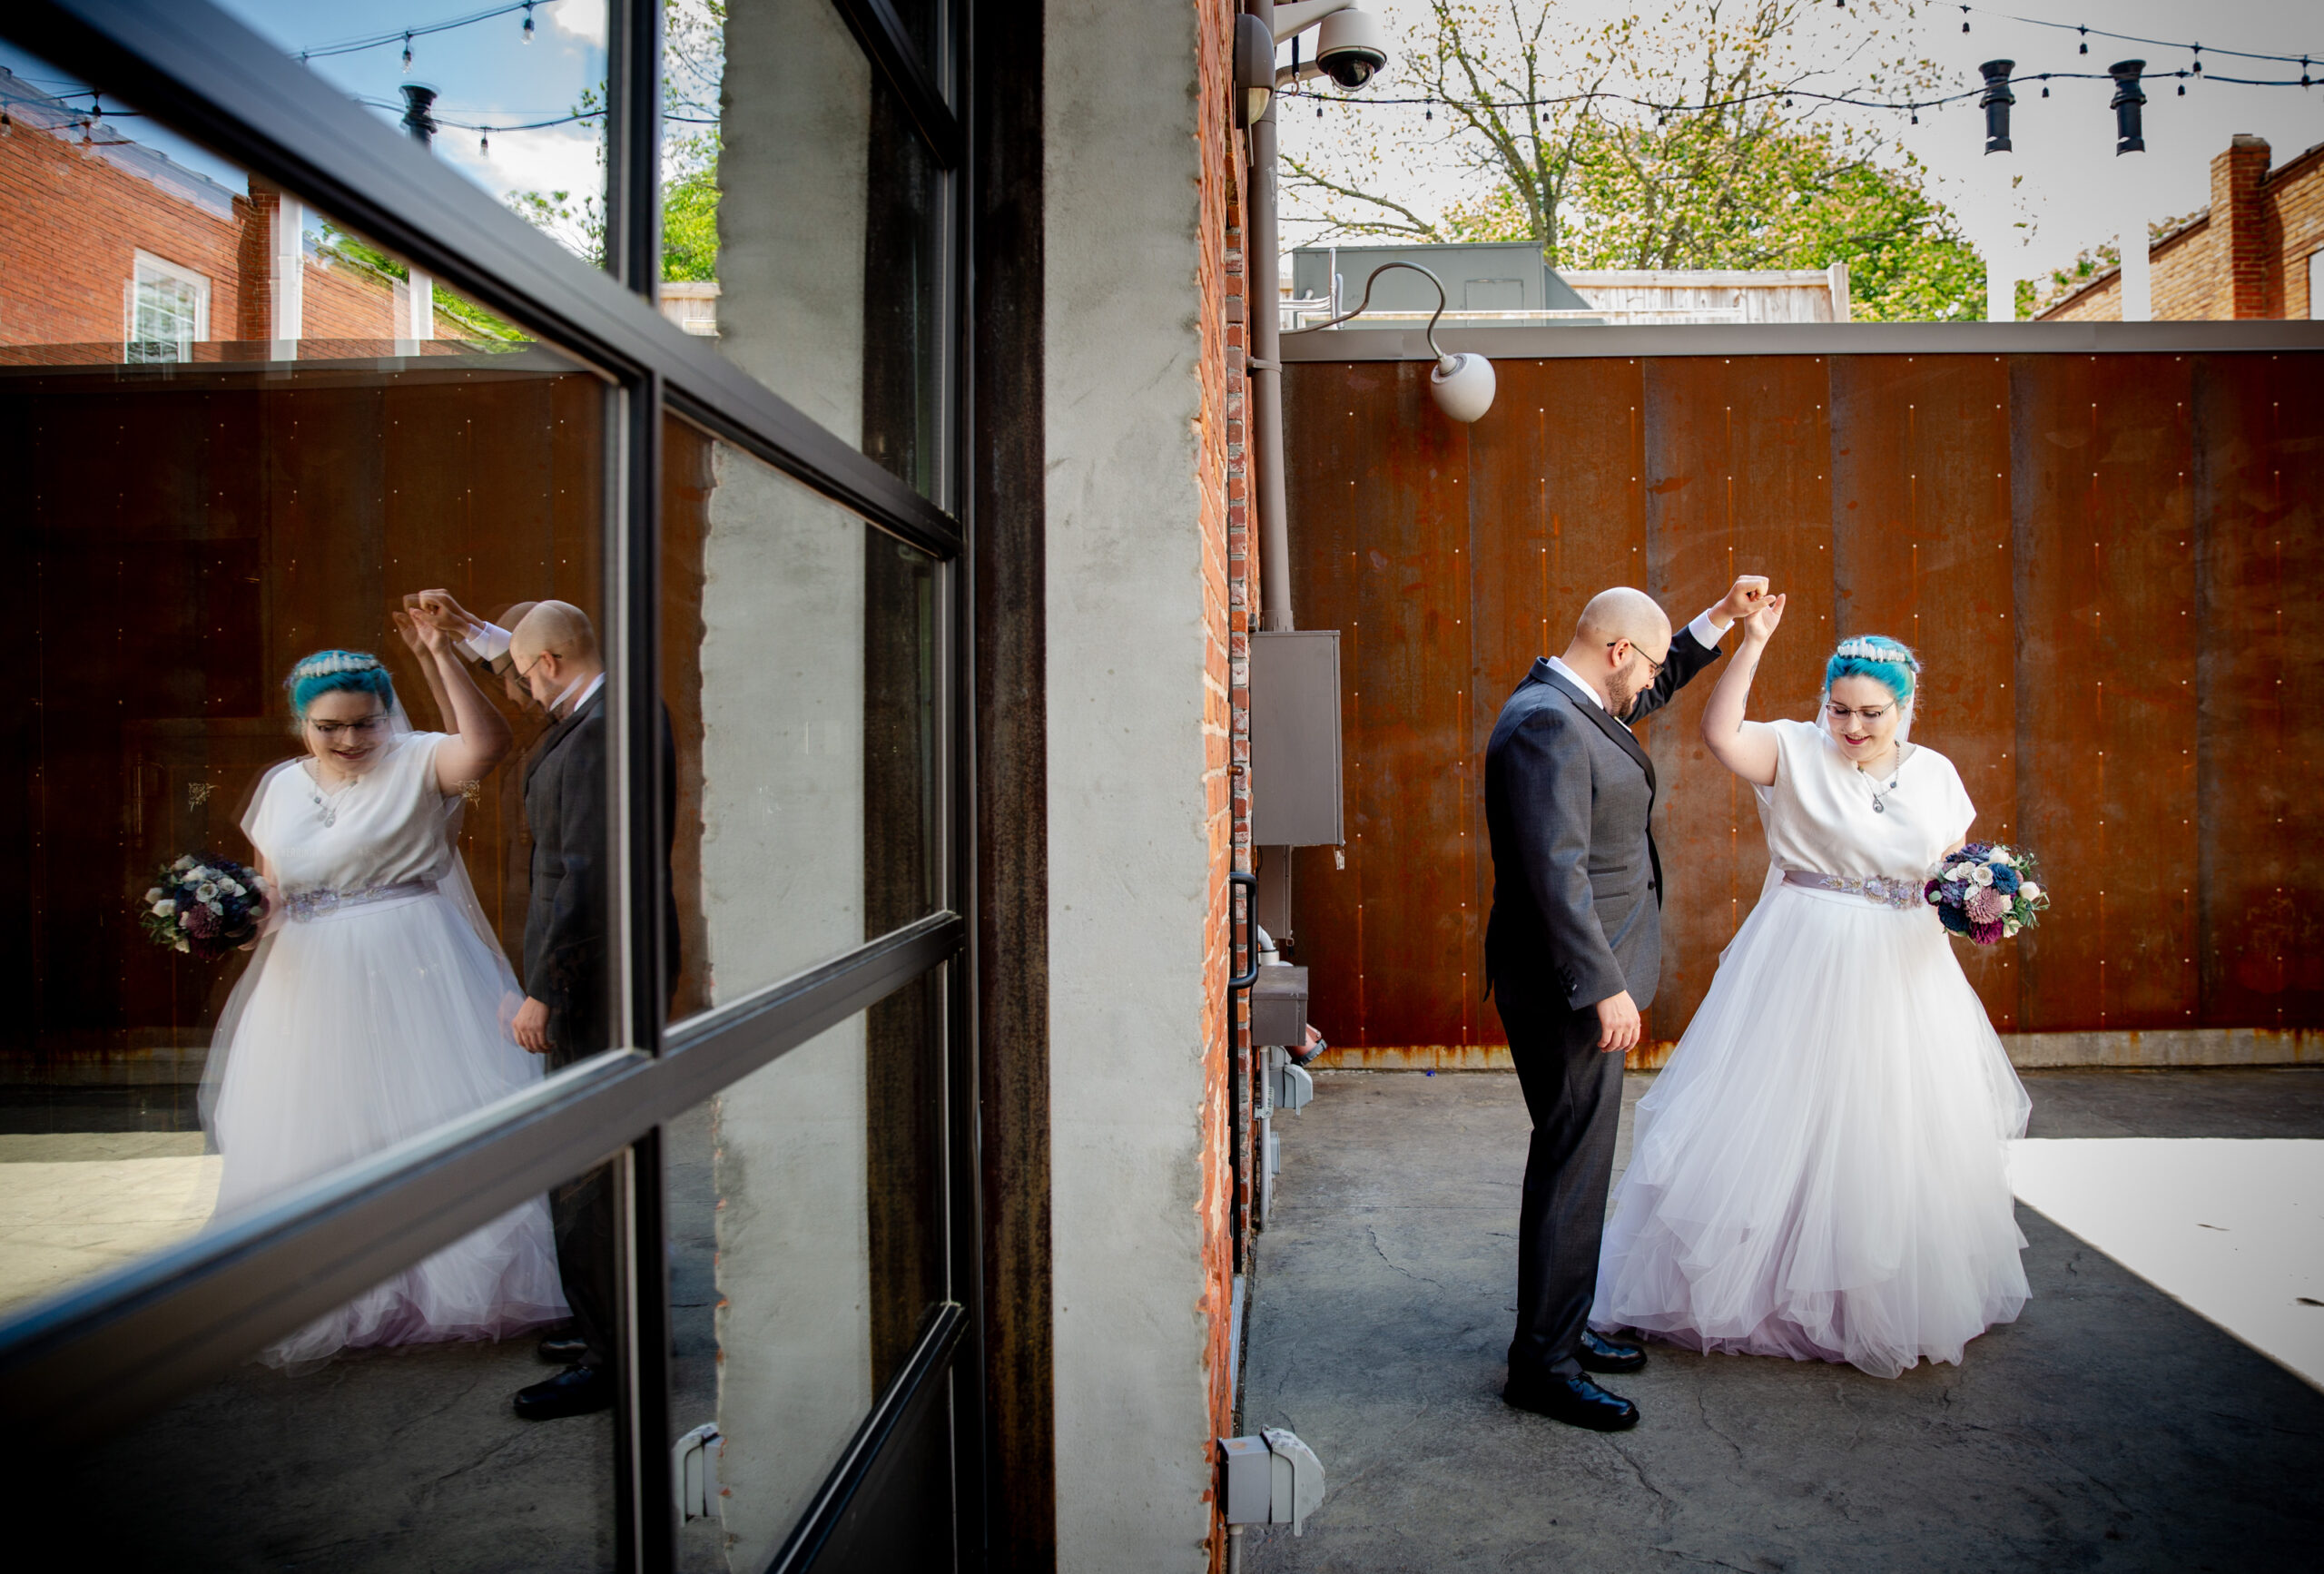 A groom in dark grey and bride in a white two skirt & blouse dance in an outdoor courtyard.